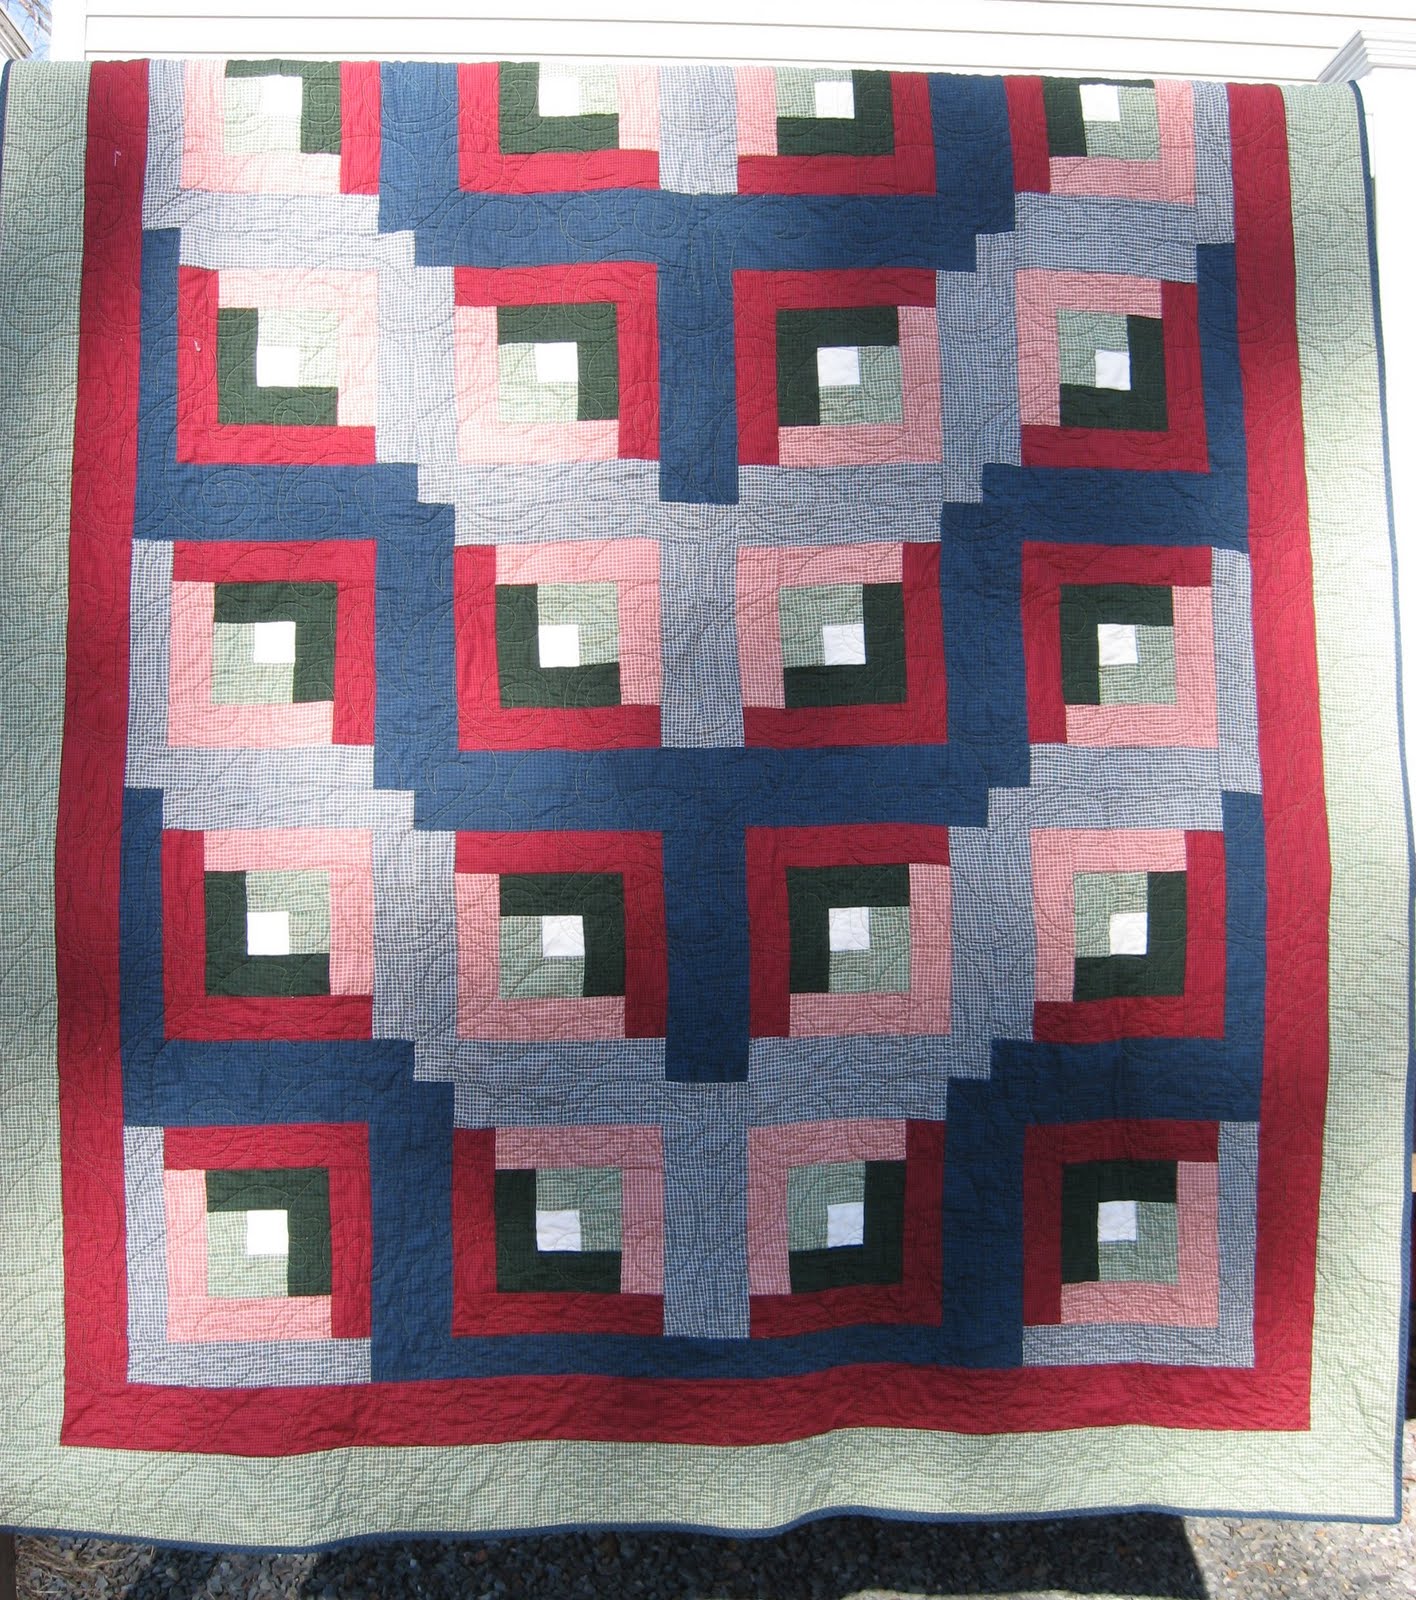 Hooked on Needles: Log Cabin Quilt ~ 18 year Work in Progress